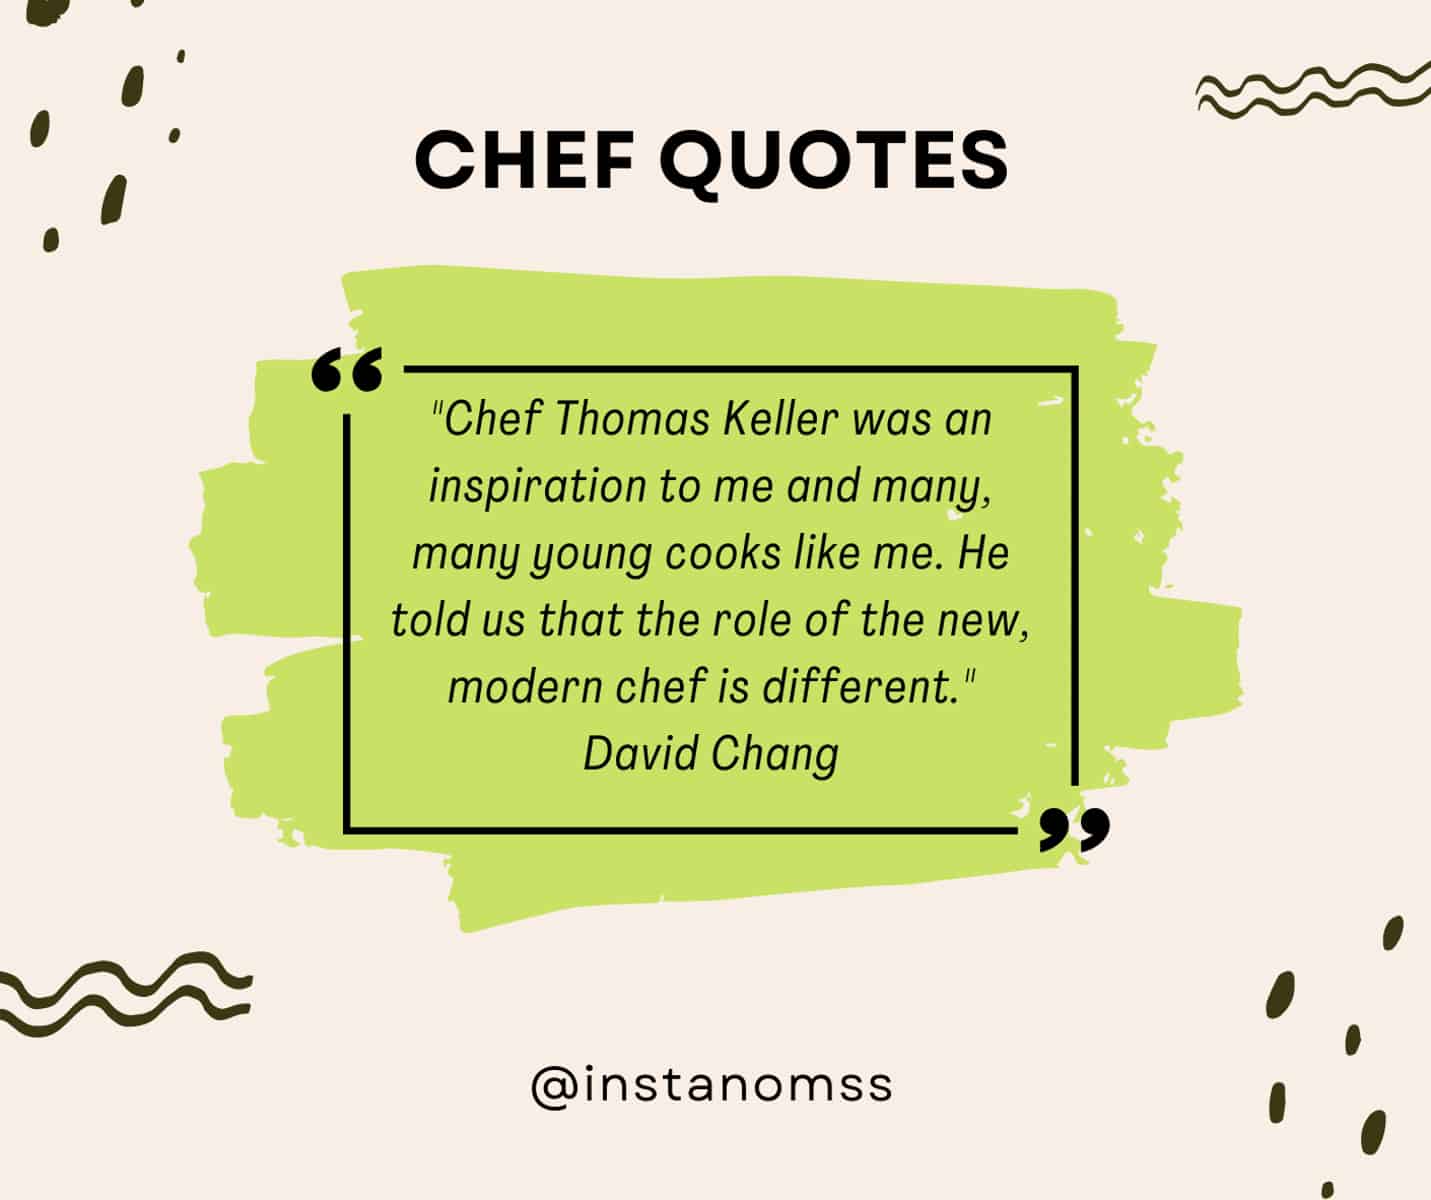 "Chef Thomas Keller was an inspiration to me and many, many young cooks like me. He told us that the role of the new, modern chef is different." David Chang